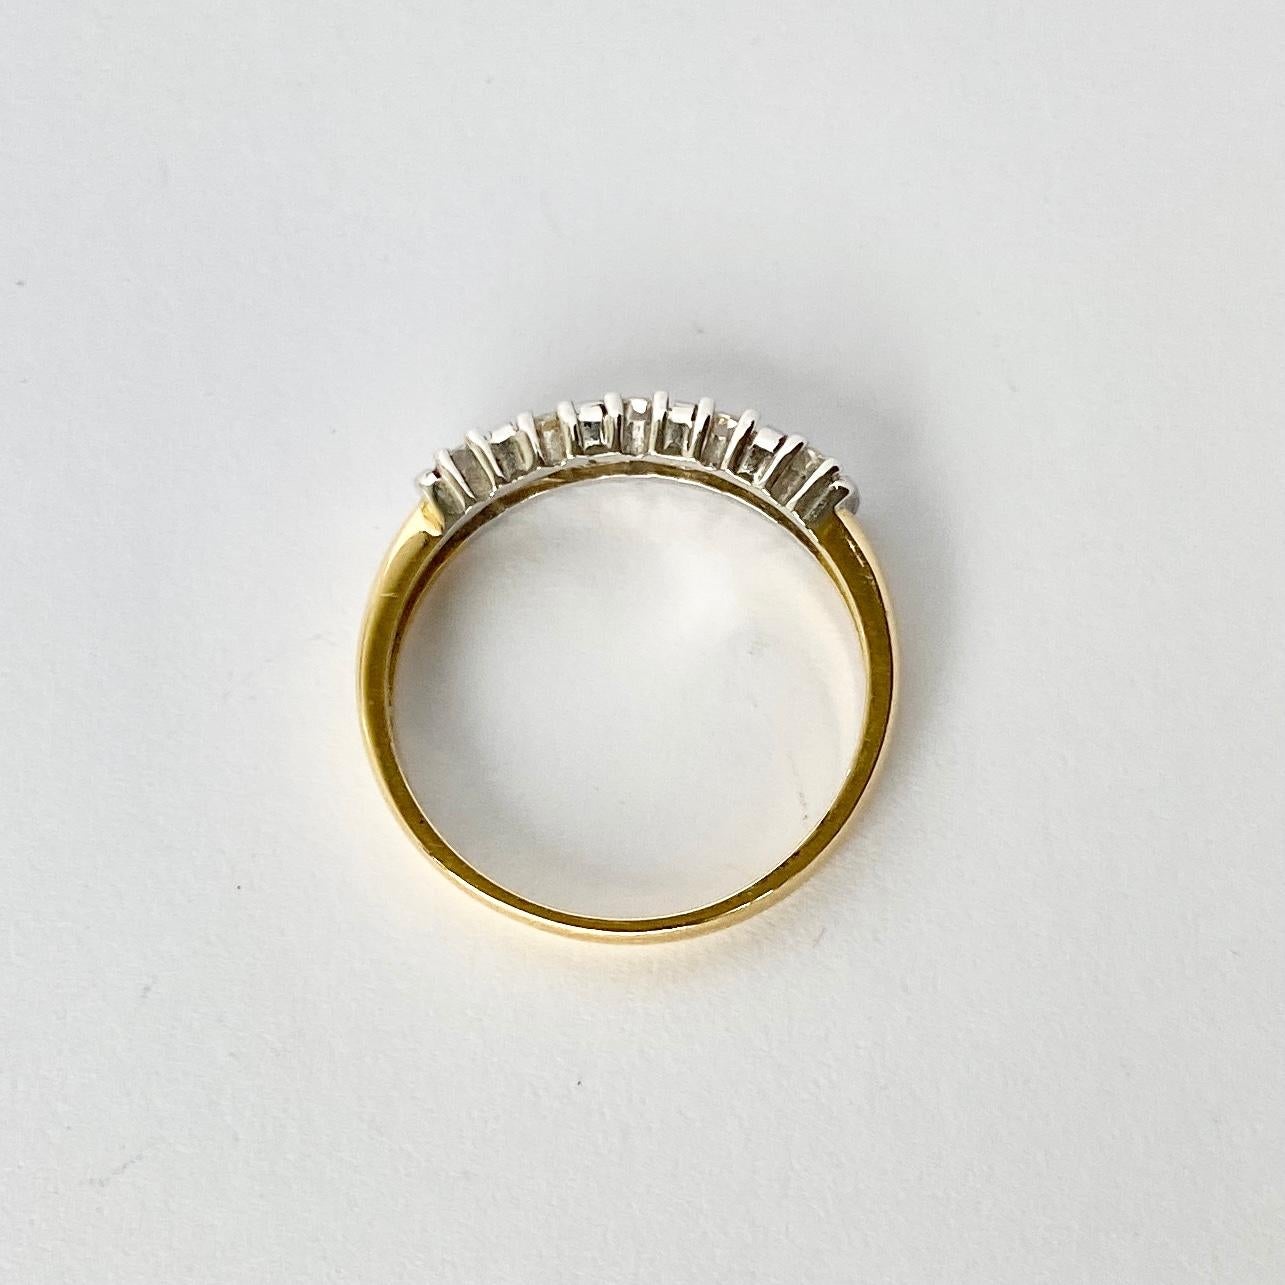 Five glistening diamonds sit fabulously on top of a simple setting modelled in 18ct gold and platinum. The diamond total is 75pts.

Ring Size: Q or 8 
Width: 3.5mm
Height Off Finger: 3mm

Weight: 3.2g